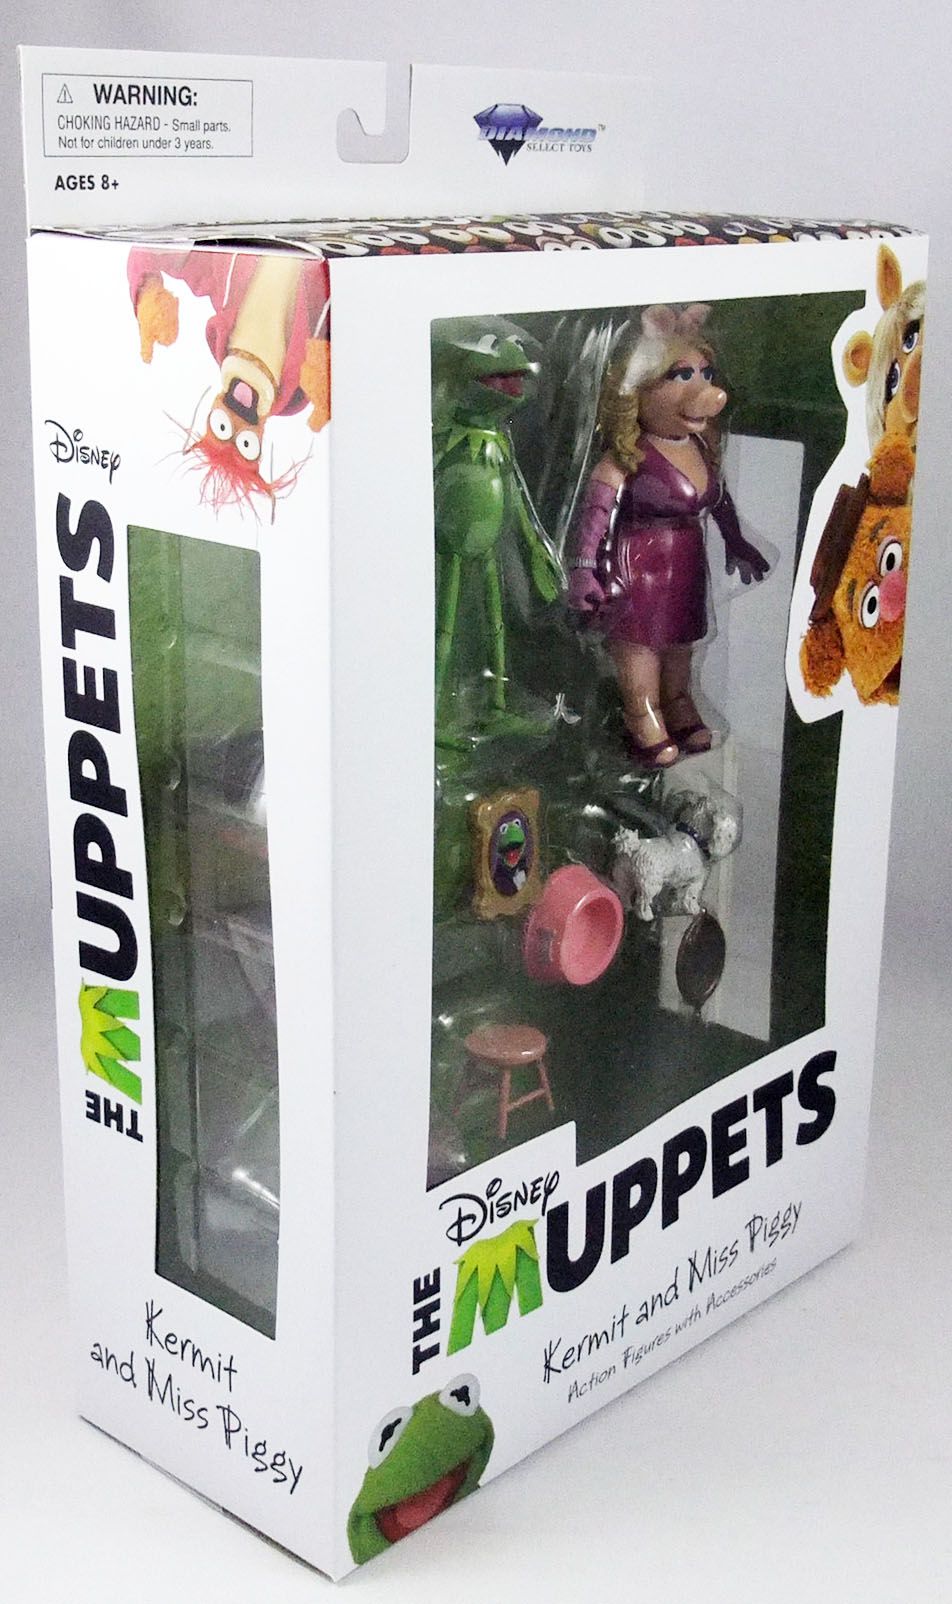 Diamond Select Toys The Muppets Best of Series 1: Kermit & Miss Piggy  Action Figure Two-Pack, Multicolor